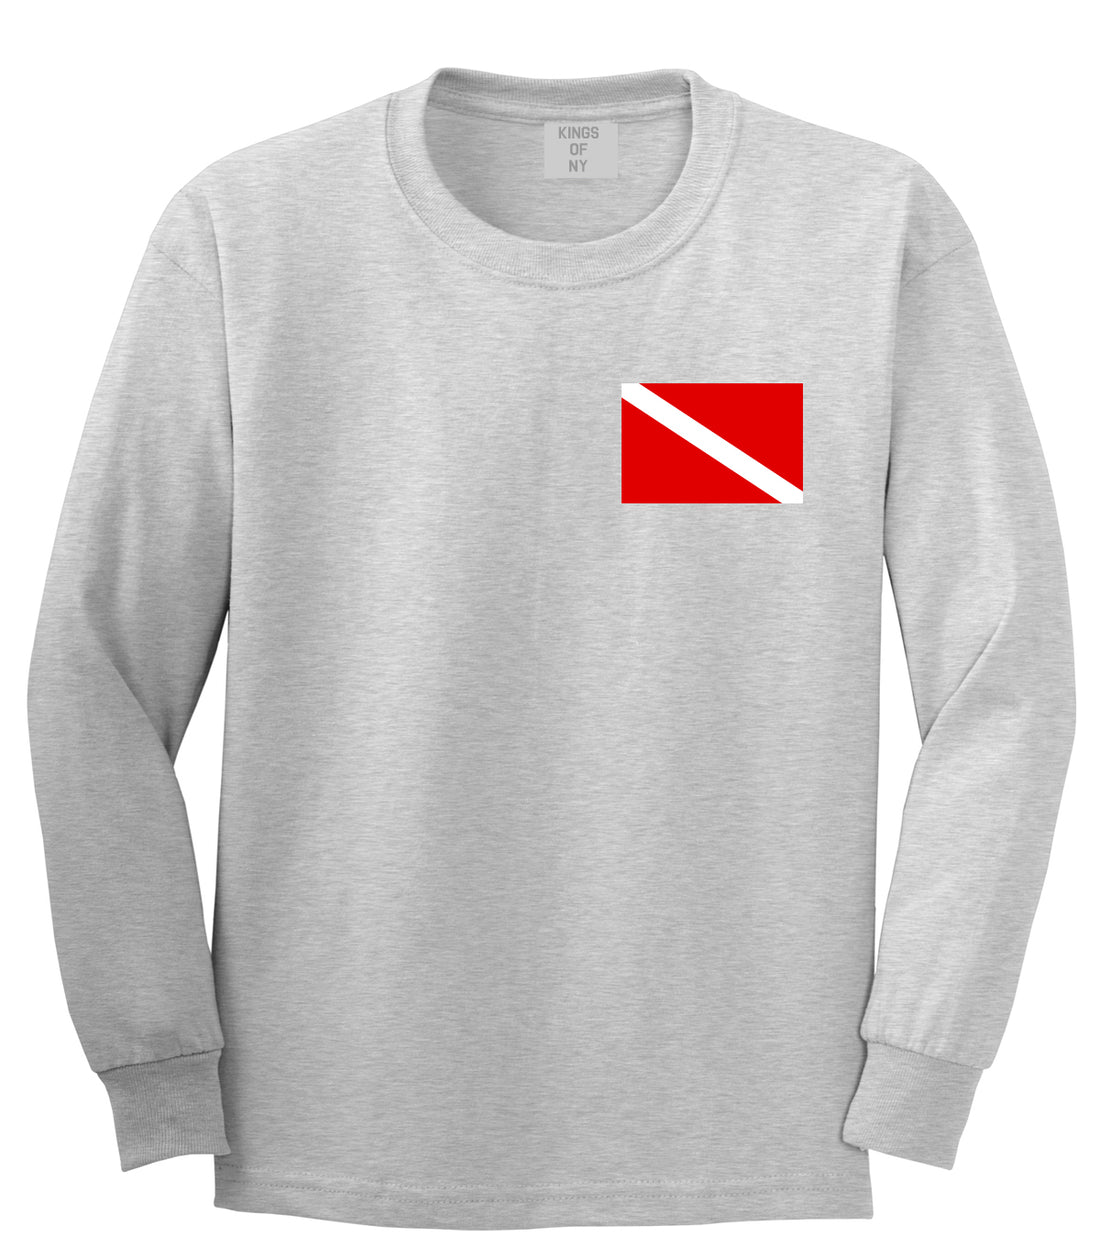 Scuba Dive Flag Chest Mens Grey Long Sleeve T-Shirt by Kings Of NY